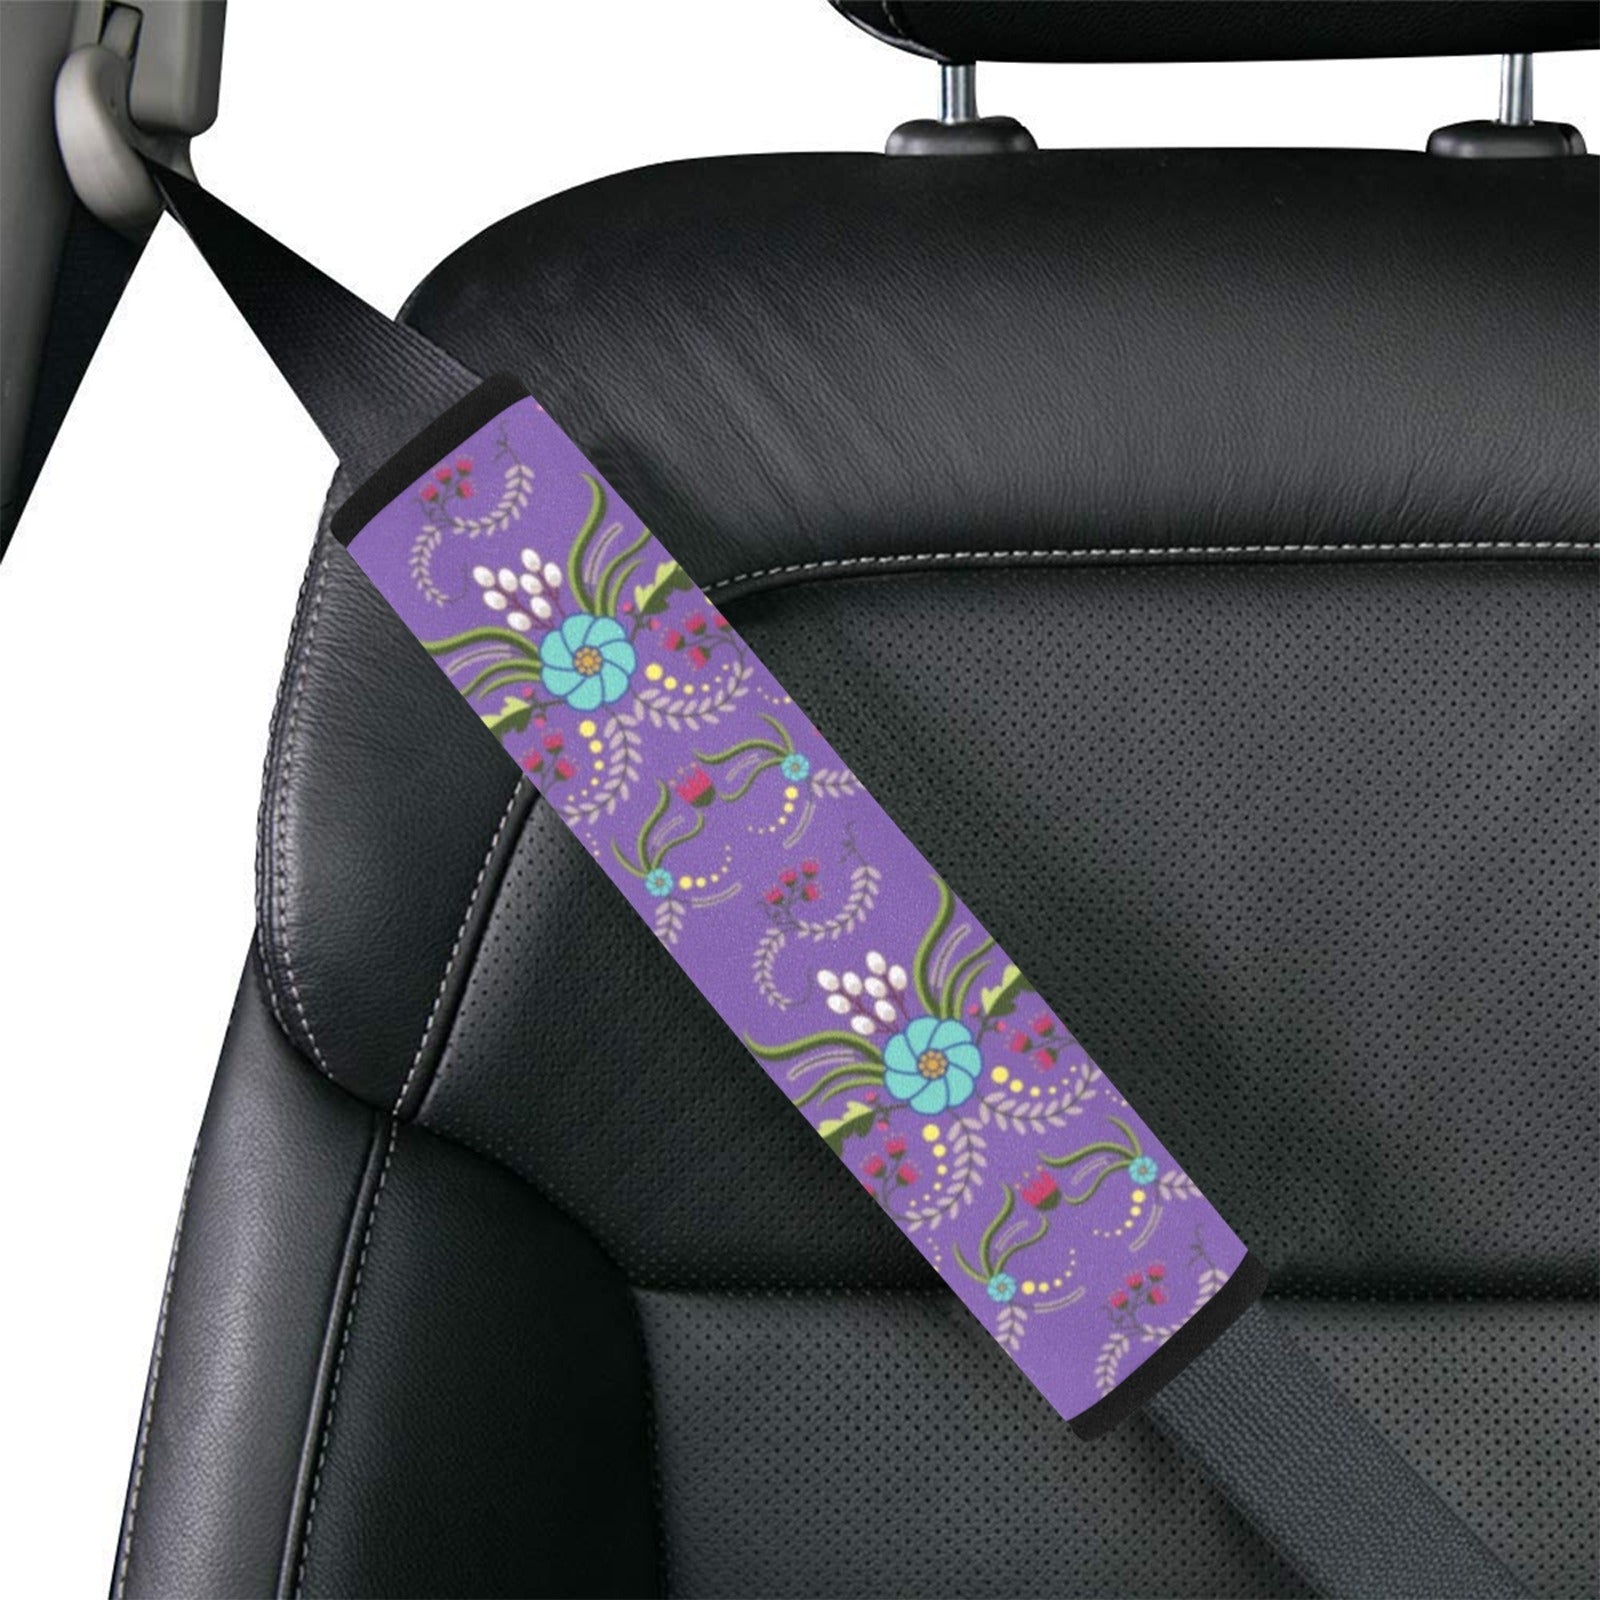 First Bloom Royal Car Seat Belt Cover 7''x12.6'' (Pack of 2)